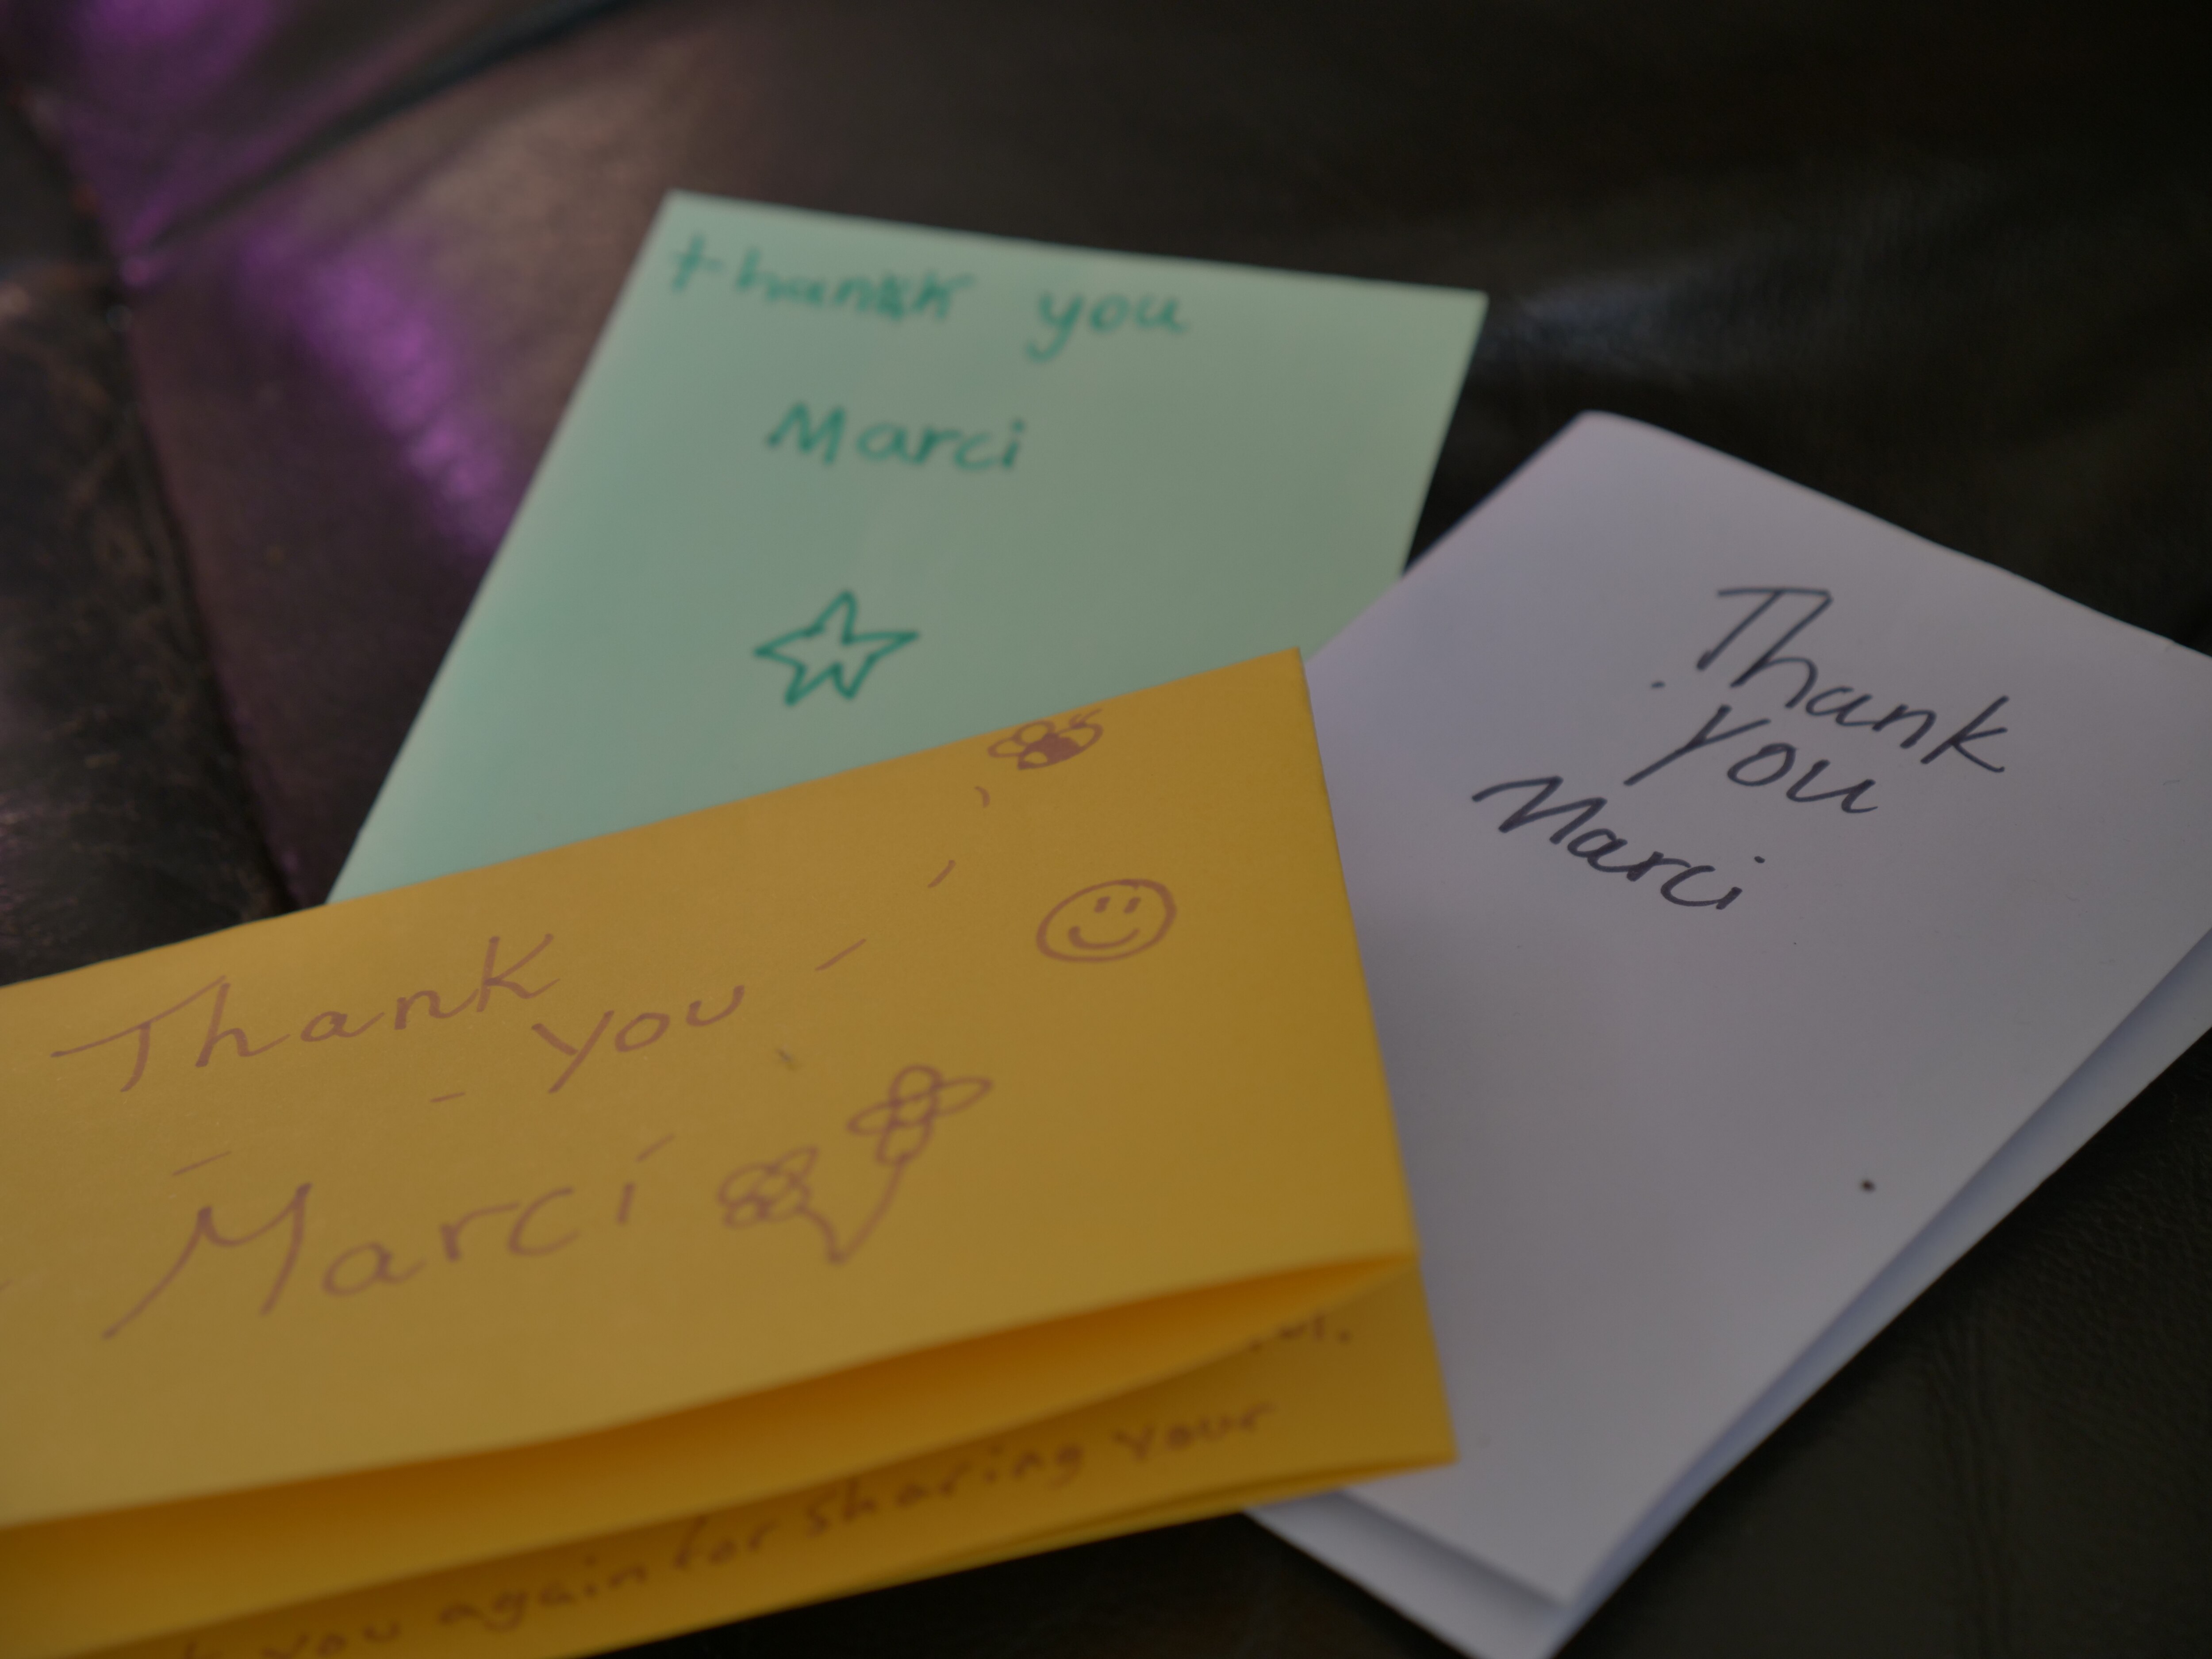 Letters Marci has received from students thanking her for telling her story